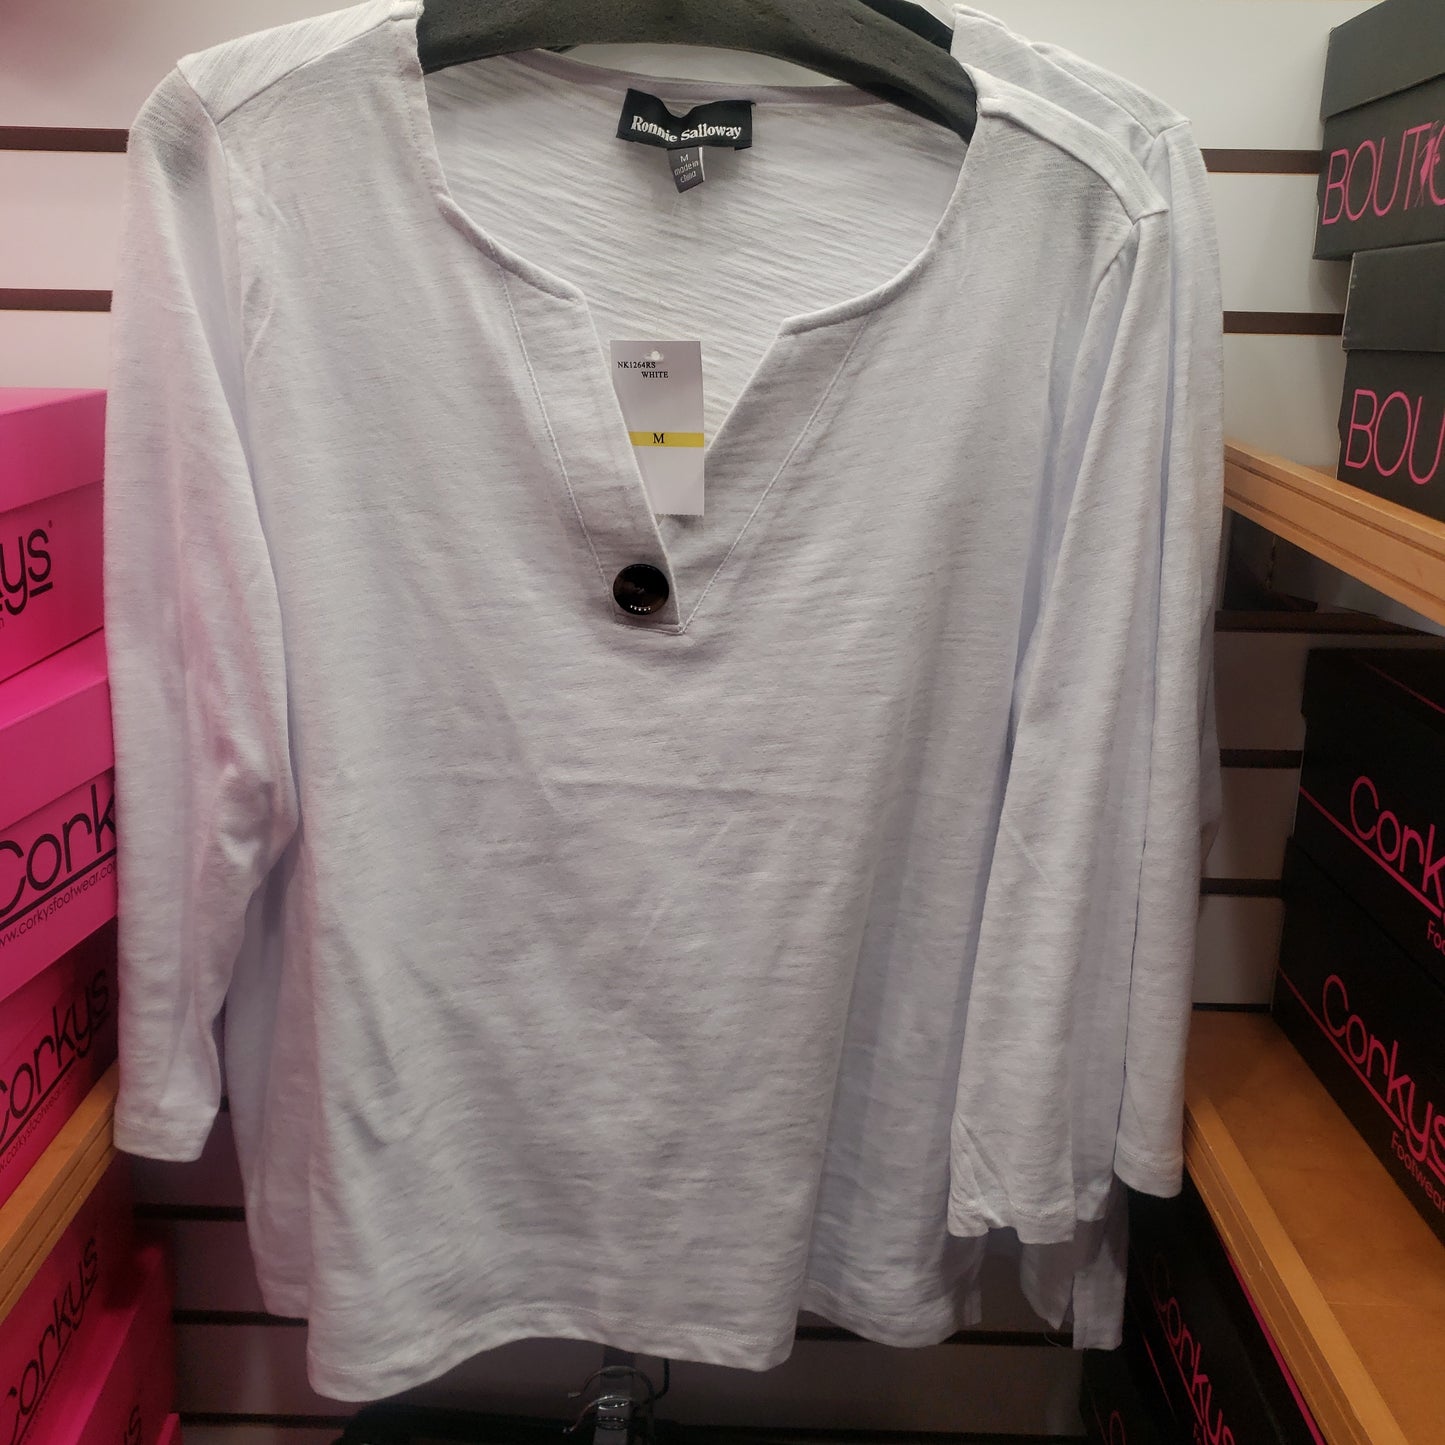 A RONNIE SALLOWAY & CO INC 3/4 Cotton Top with Button Accent in White hangs on a rack. Pink and black boxes are visible on the shelves in the background.